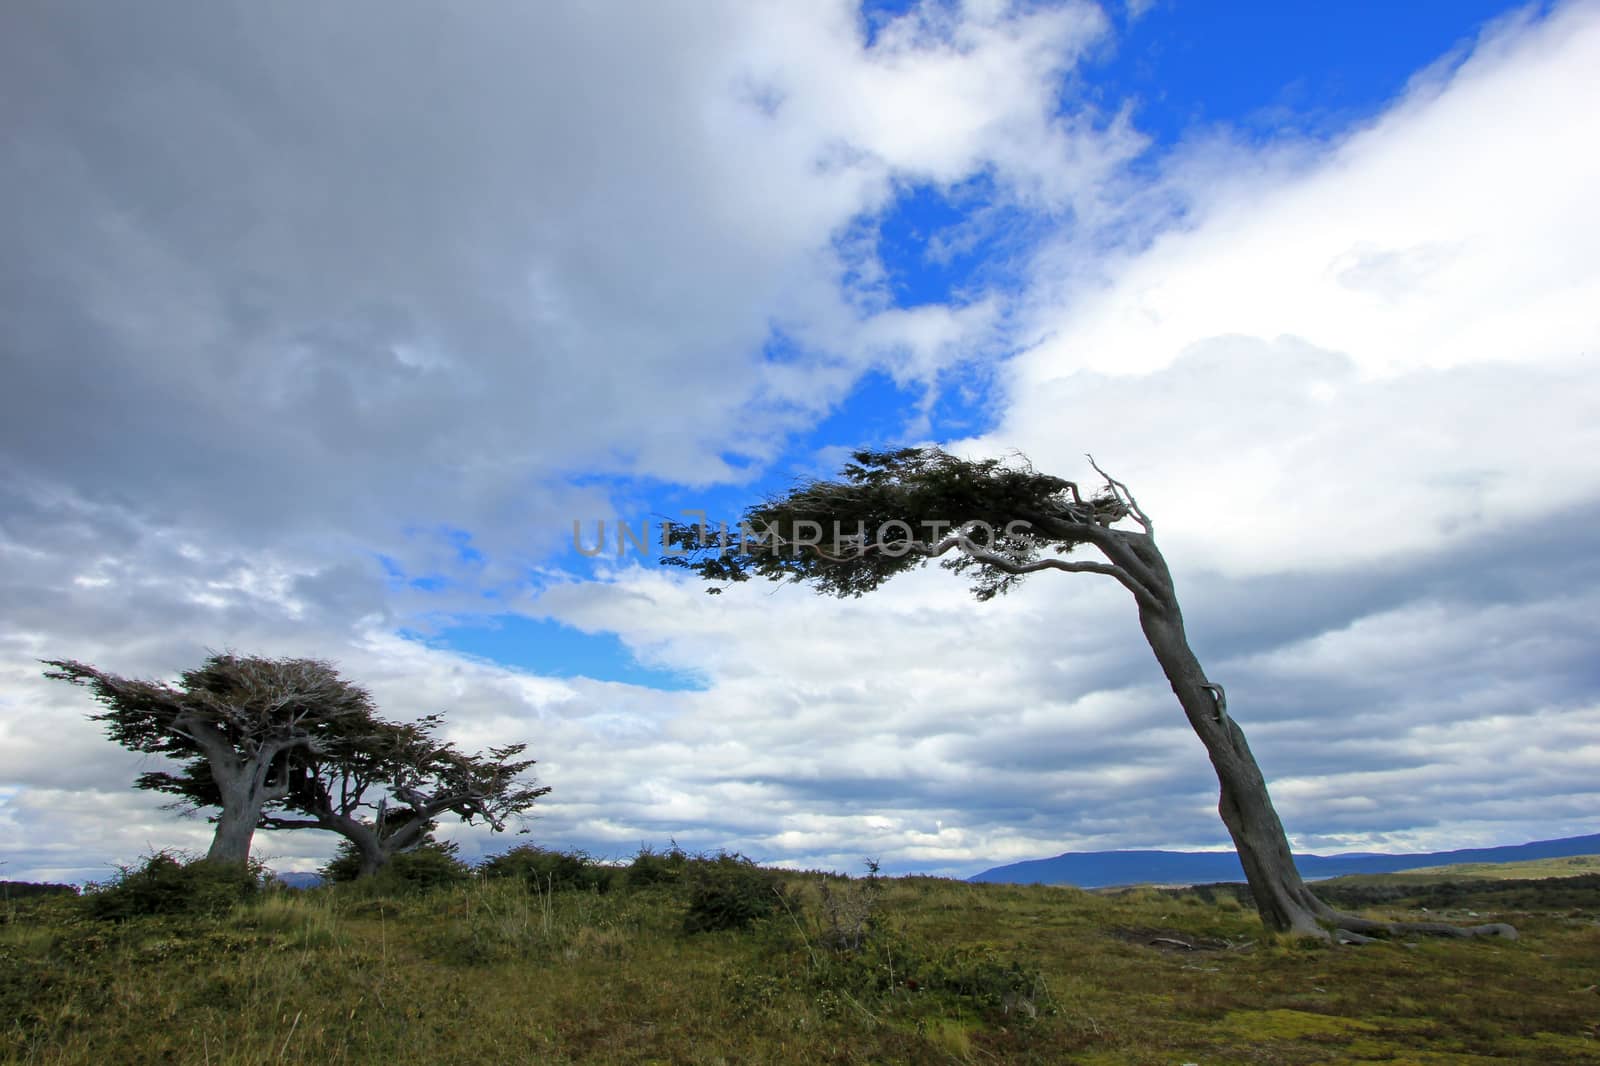 Tree deformed by wind, Patagonia, Argentina by cicloco